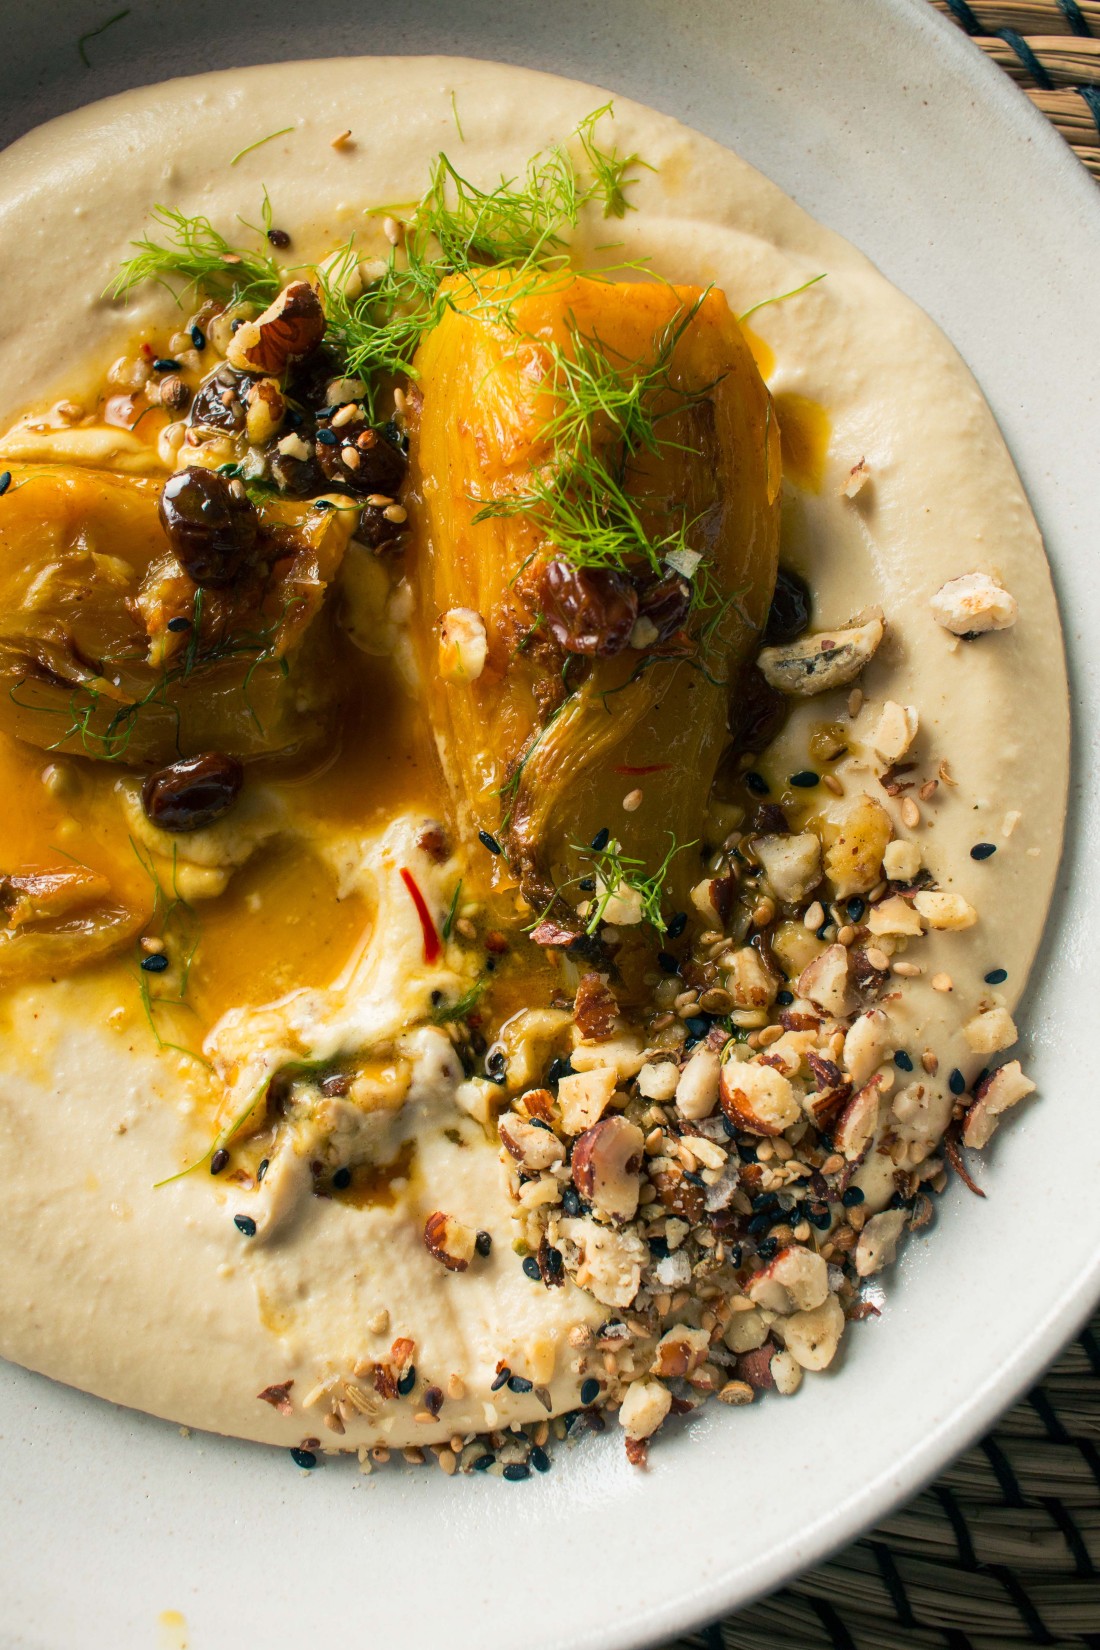 Braised Fennel with Saffron and Raisins over Hummus with Dukkah | Recipe from I Will Not Eat Oysters